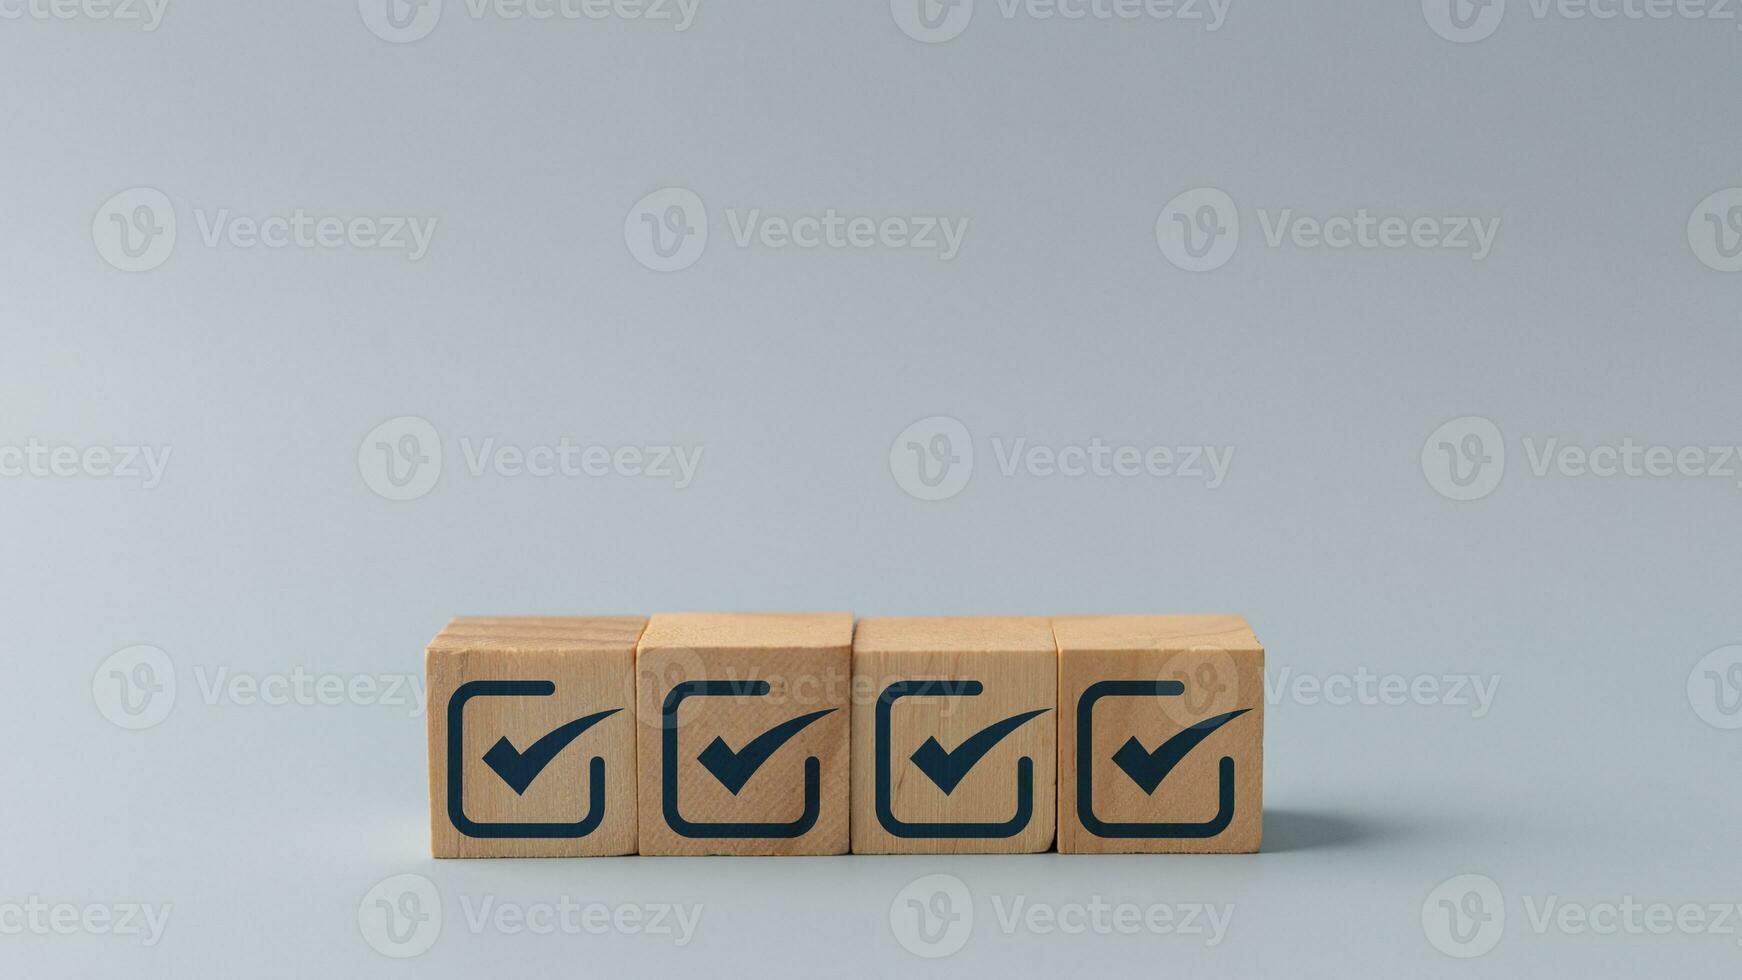 Checklist, Check mark icons for the jobs list on the wooden blocks. Task lists, Surveys, Assessments, Lists, Confirm items, Quality Control. Goals achievement business success. photo